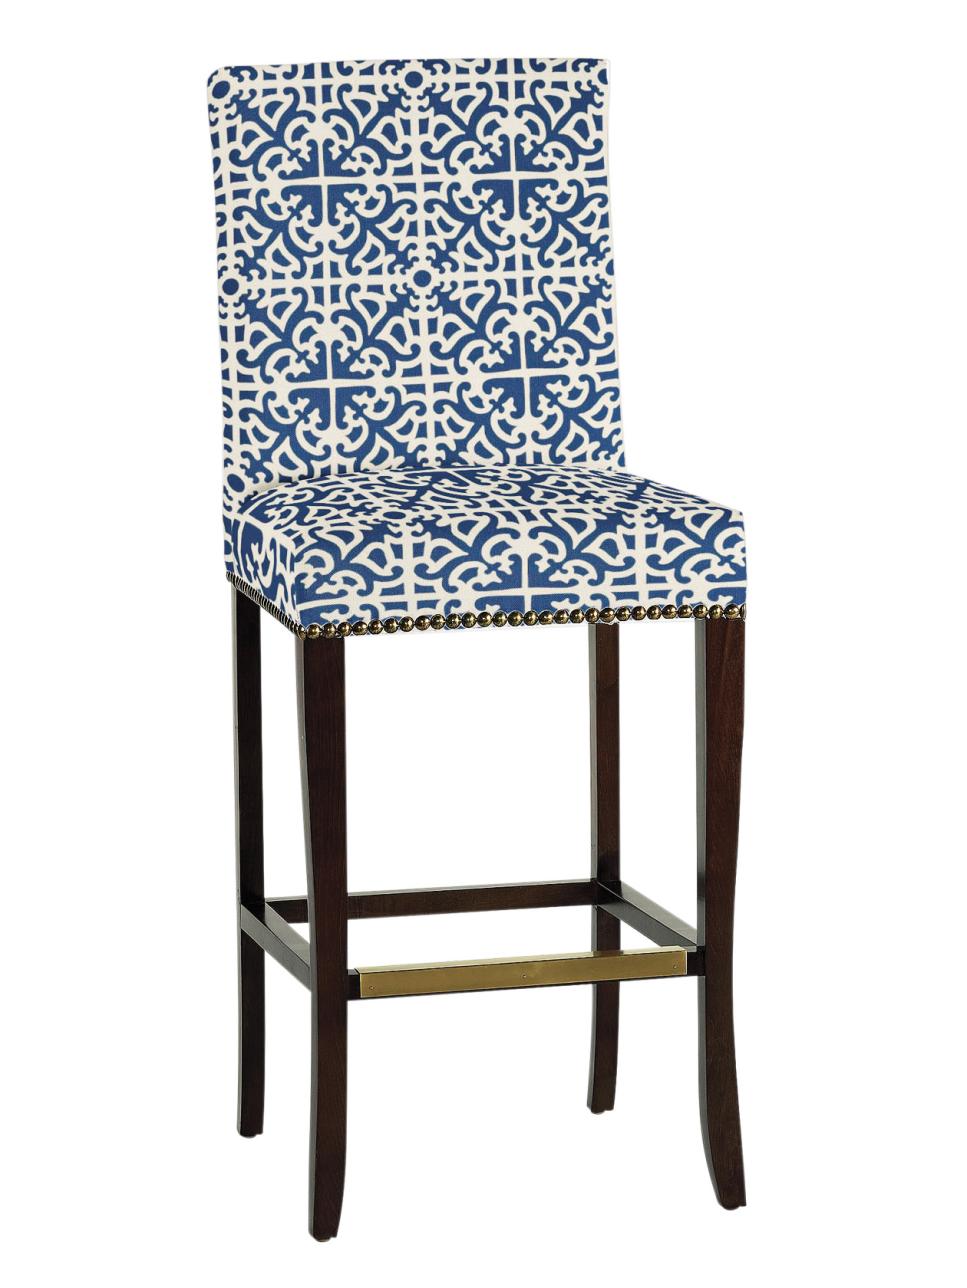 Transitional Bar Stool With Bold Blue and White Patterned Fabric HGTV